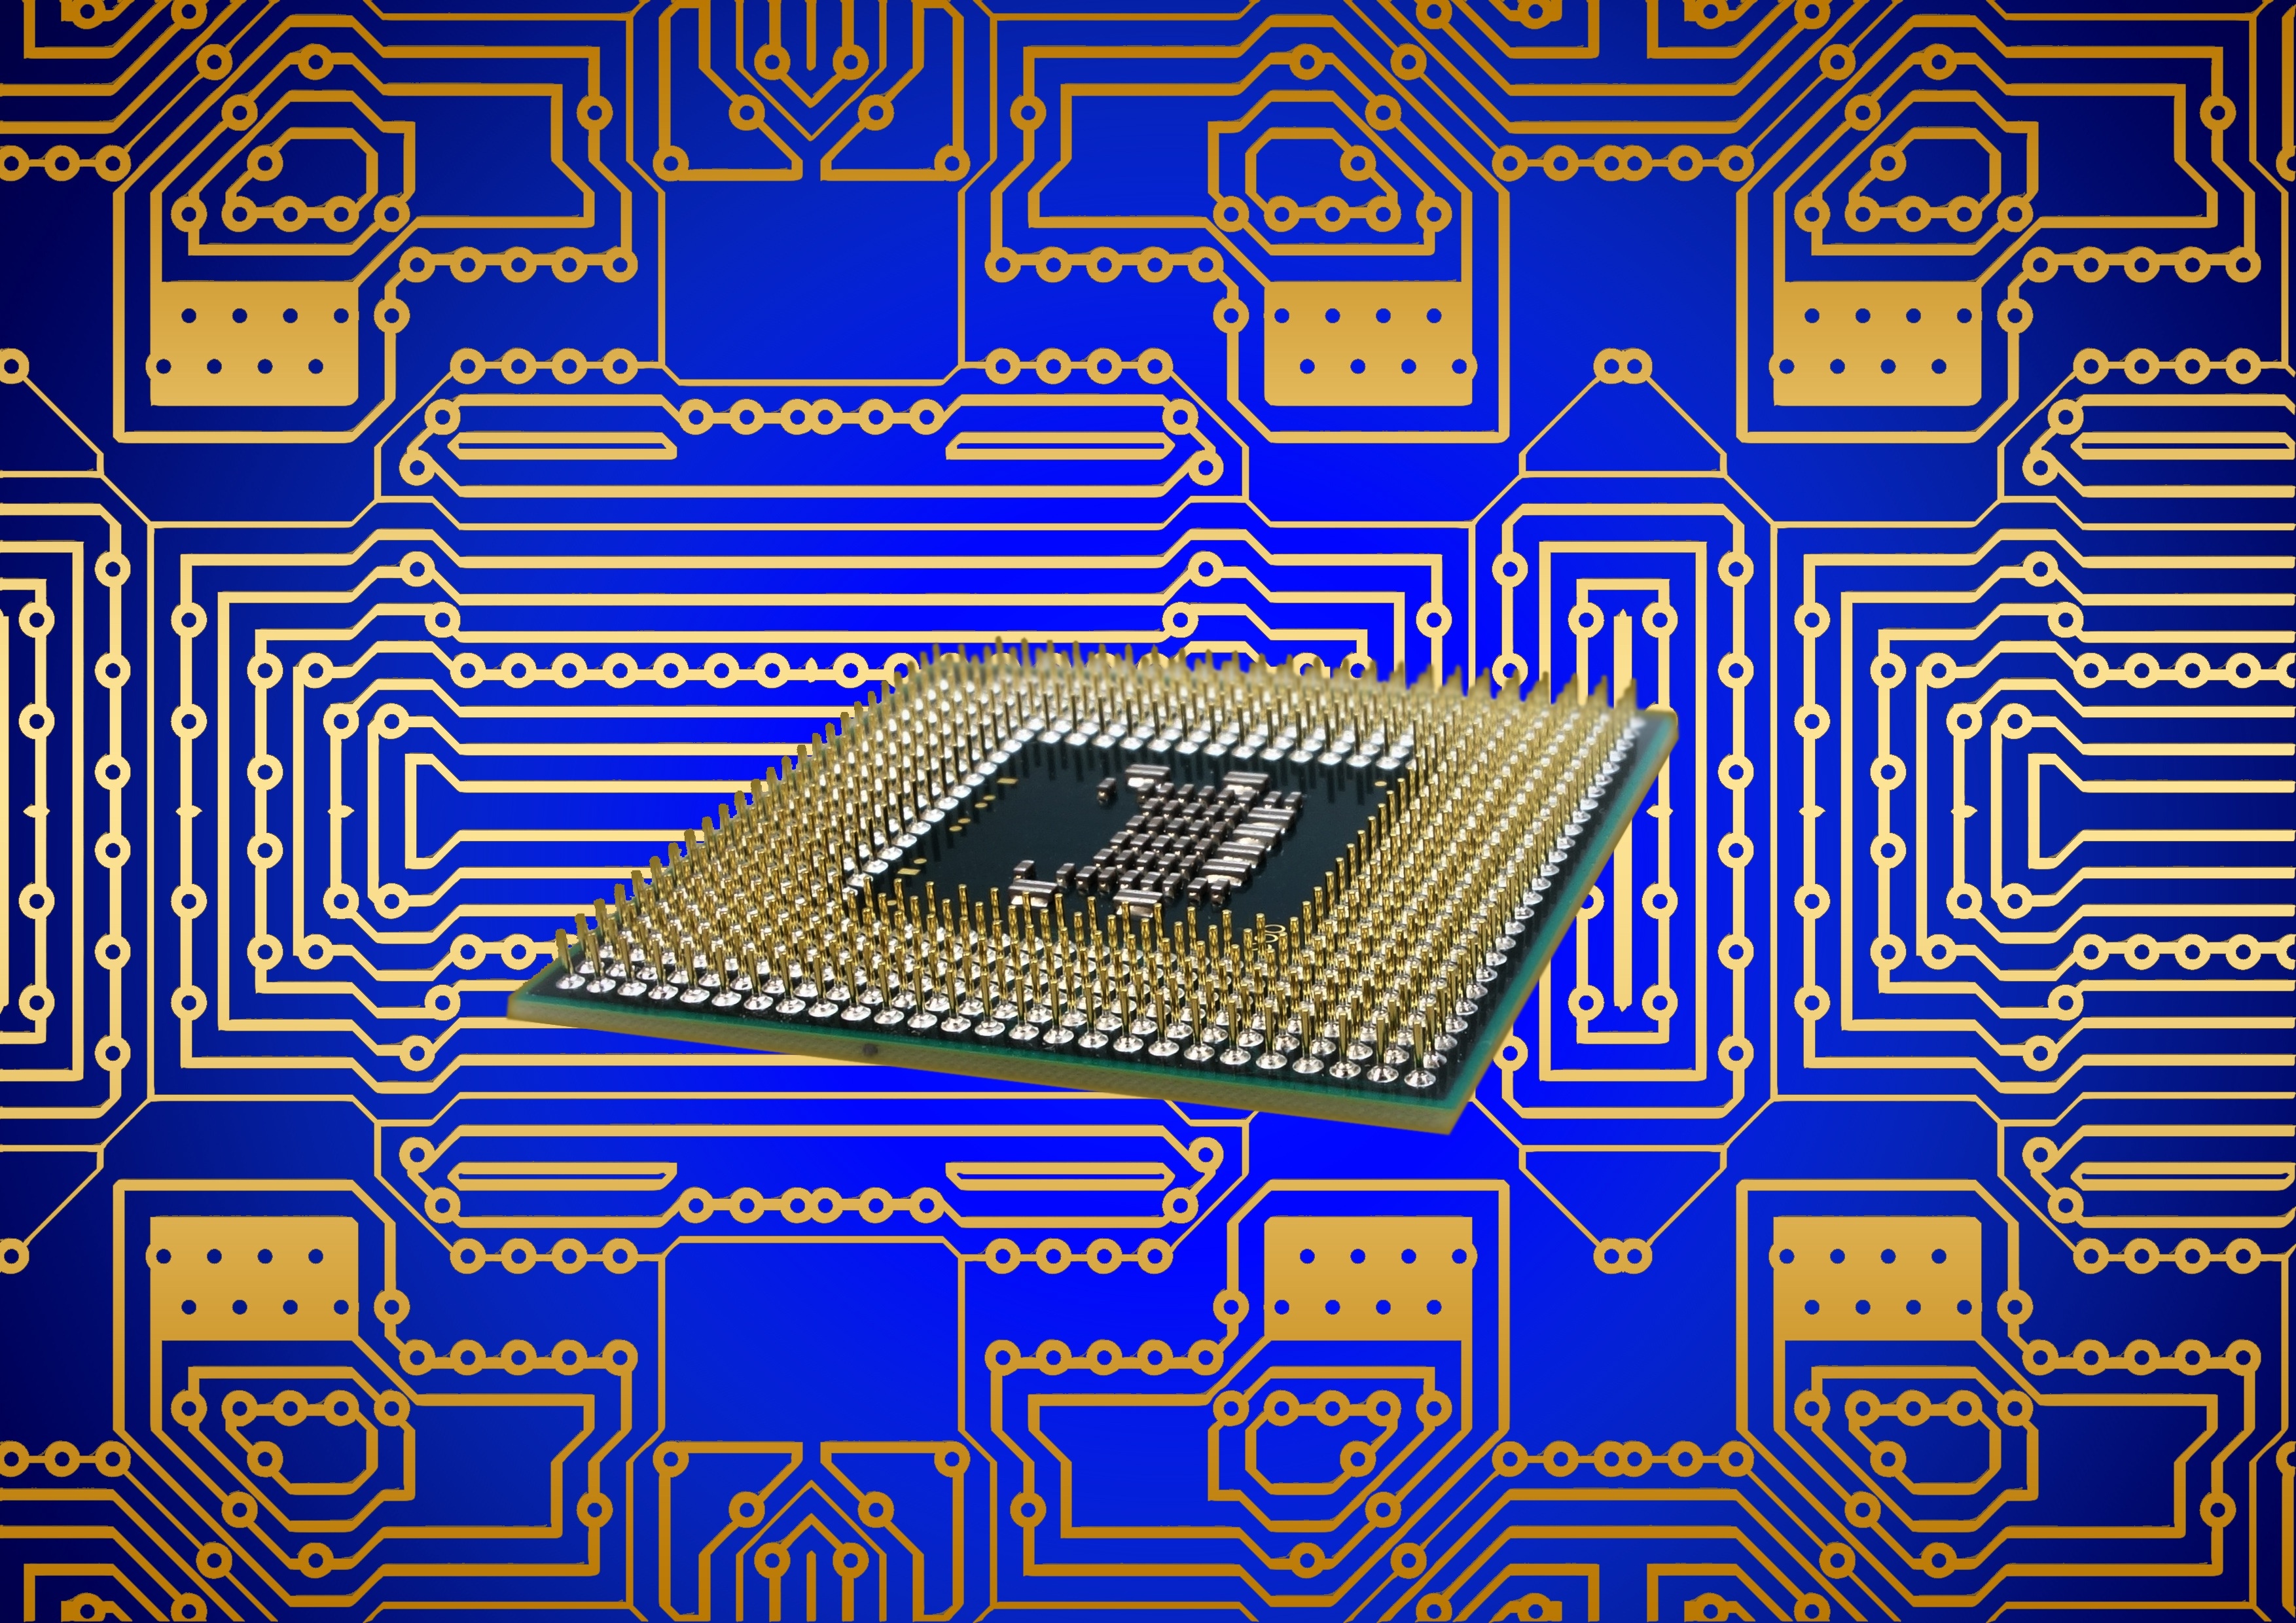 Semiconductor is experiencing a cyclical downturn, but still has potential